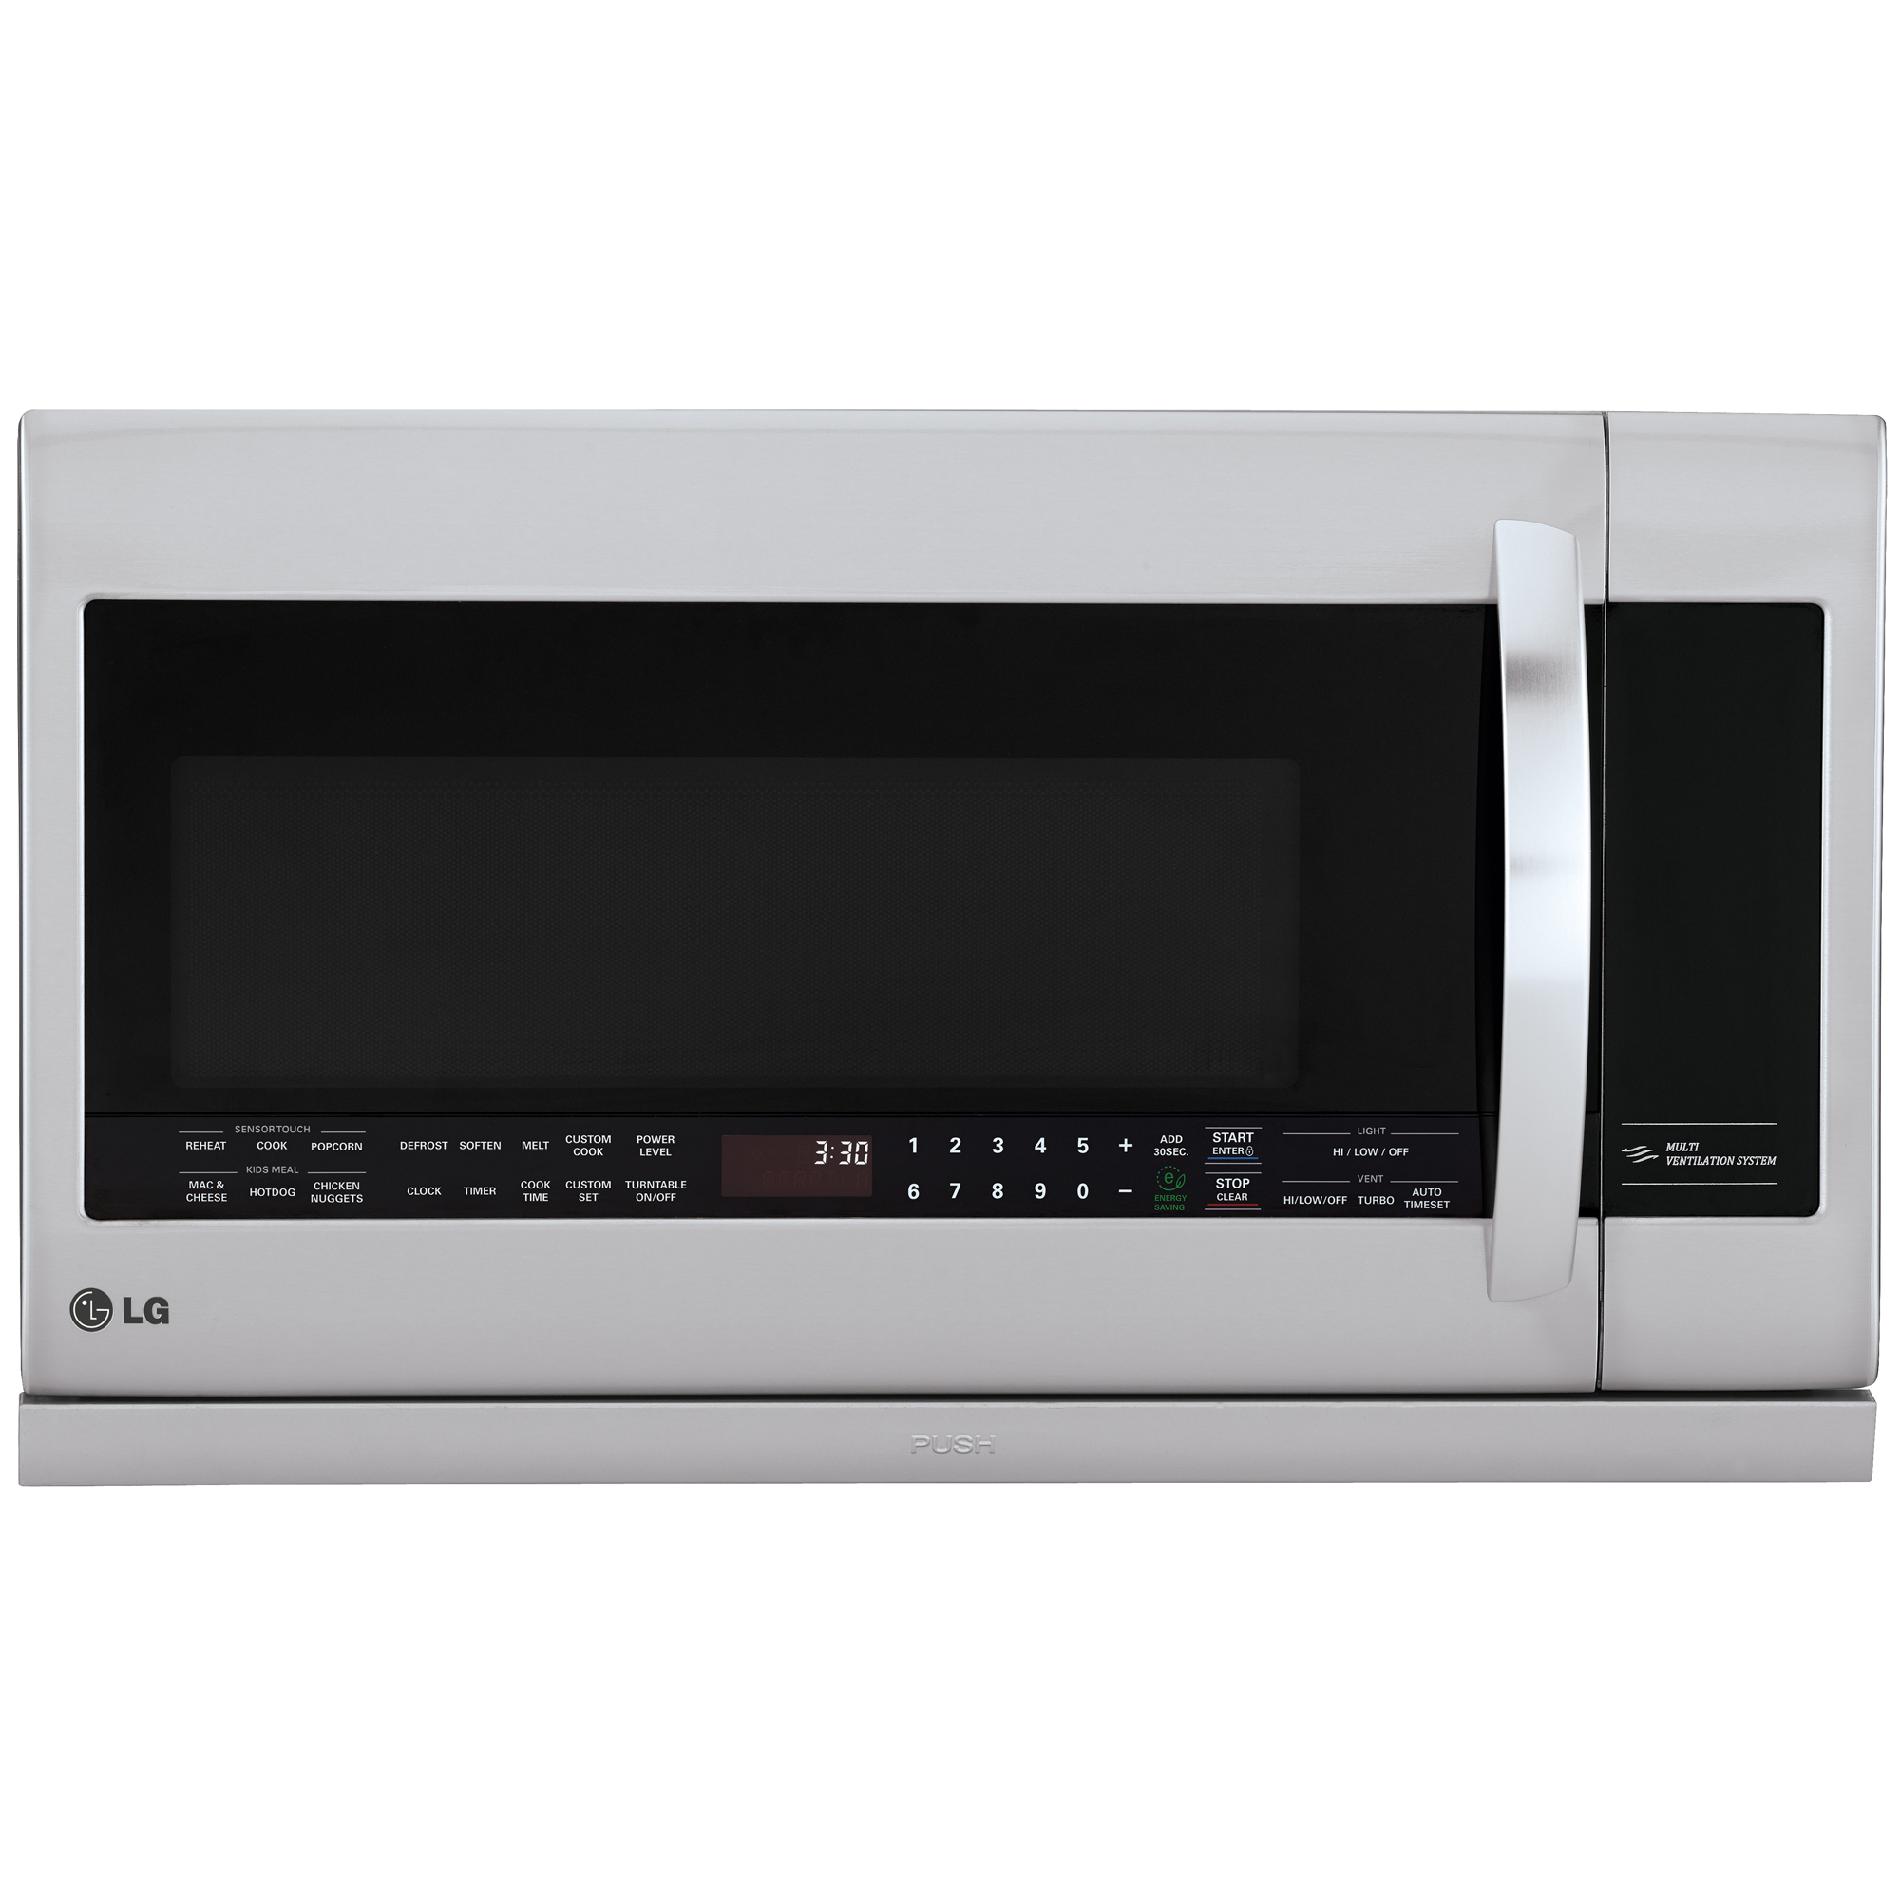 LG LMHM2237ST 2.2 cu. ft. Over-the-Range Microwave Oven with